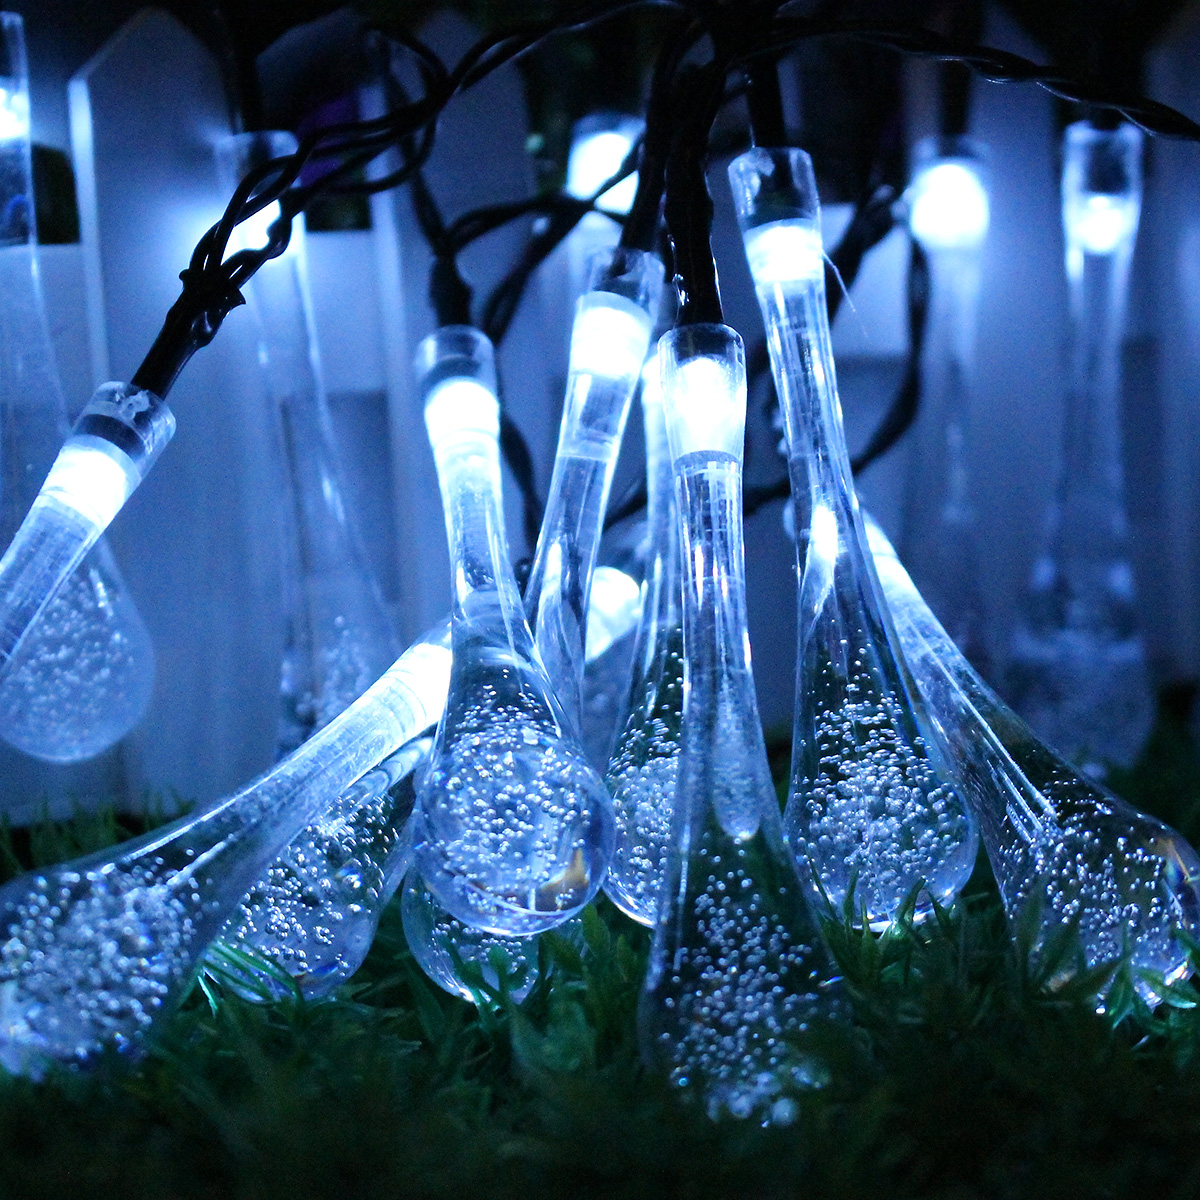 Solar-Powered-Outdoor-50-LED-Droplet-Fairy-String-Light-Wedding-Christmas-Party-Home-Decor-Lamp-DC3V-1162583-10